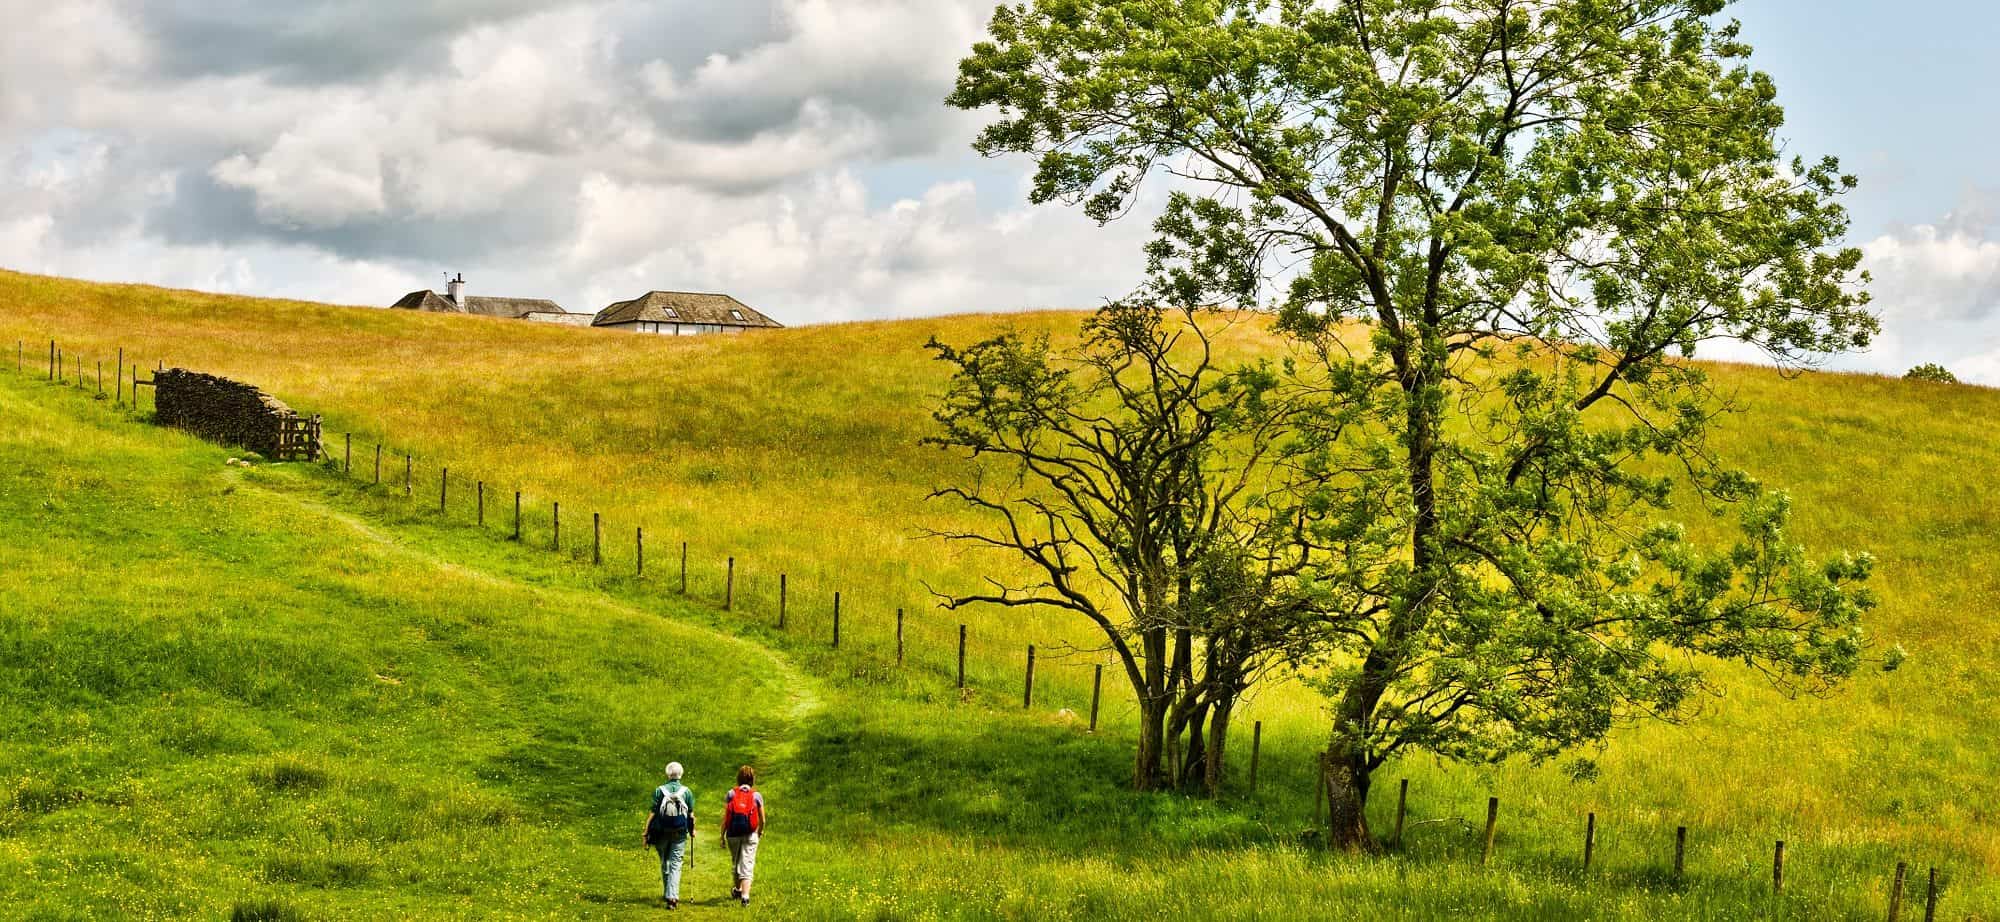 Two people walking through a golden meadow near Far Sawrey, Cumbria, in the English Lake District National Park